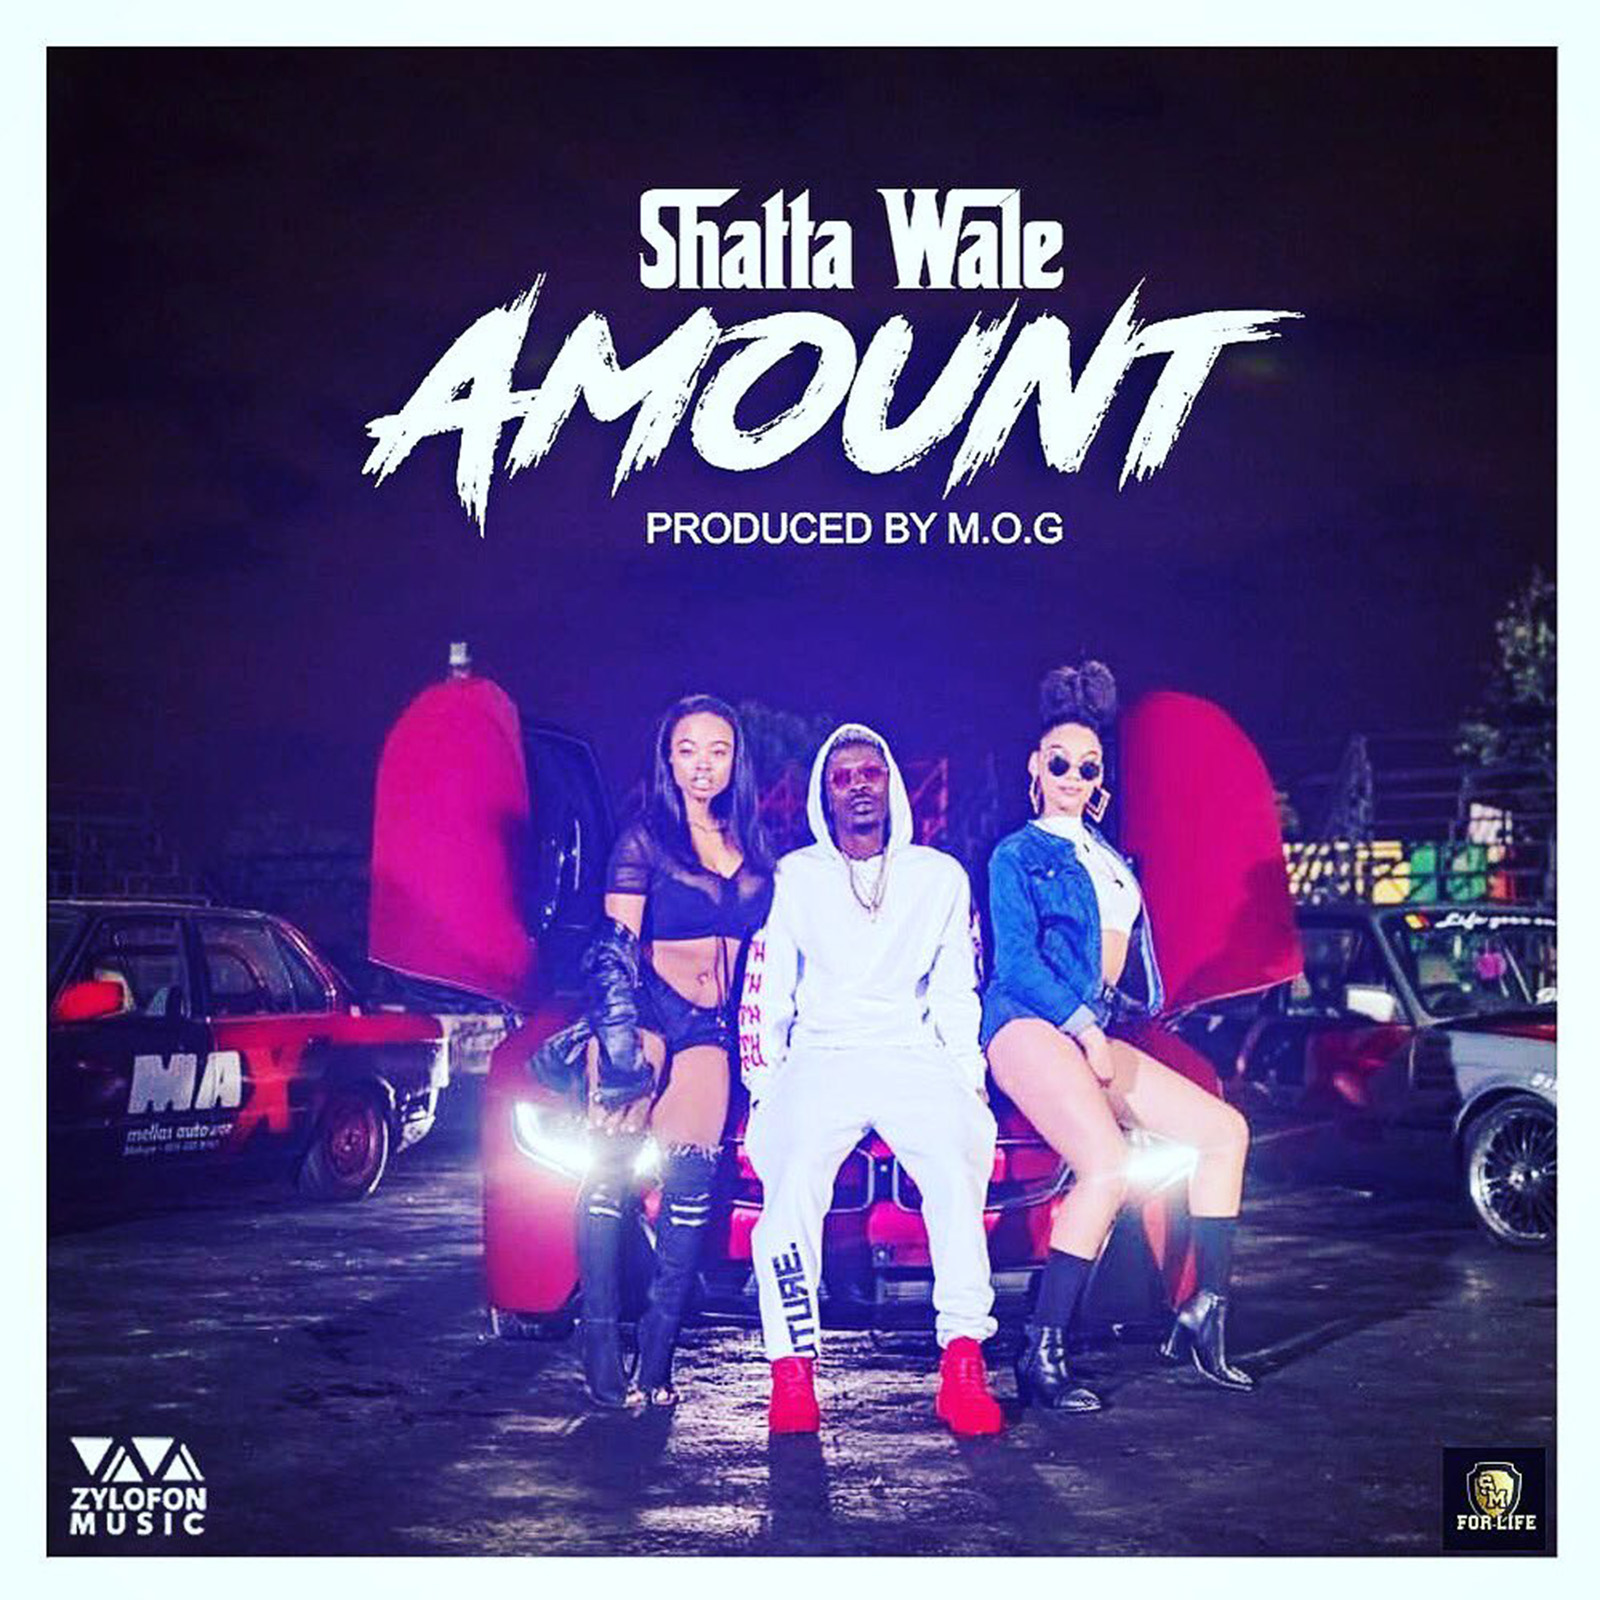 Amount by Shatta Wale